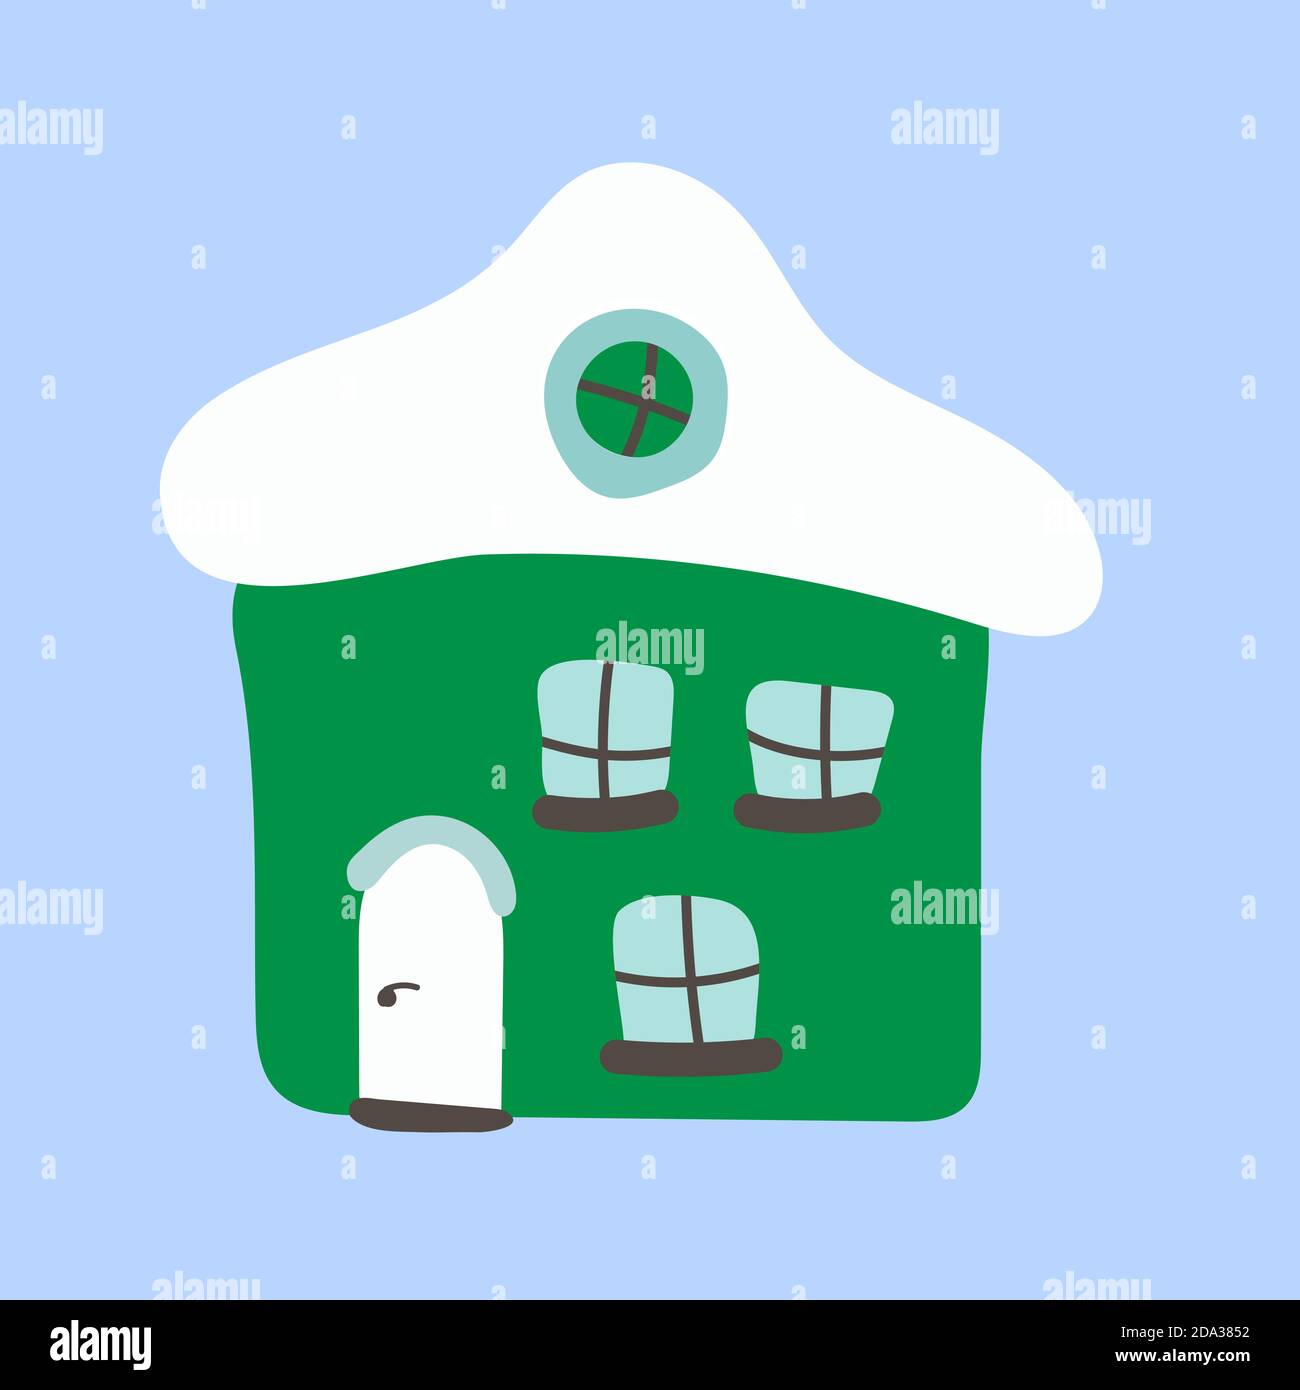 Christmas cartoon green house with snow on the roof and blue windows. Vector flat illustration isolated on blue background. Stock Vector